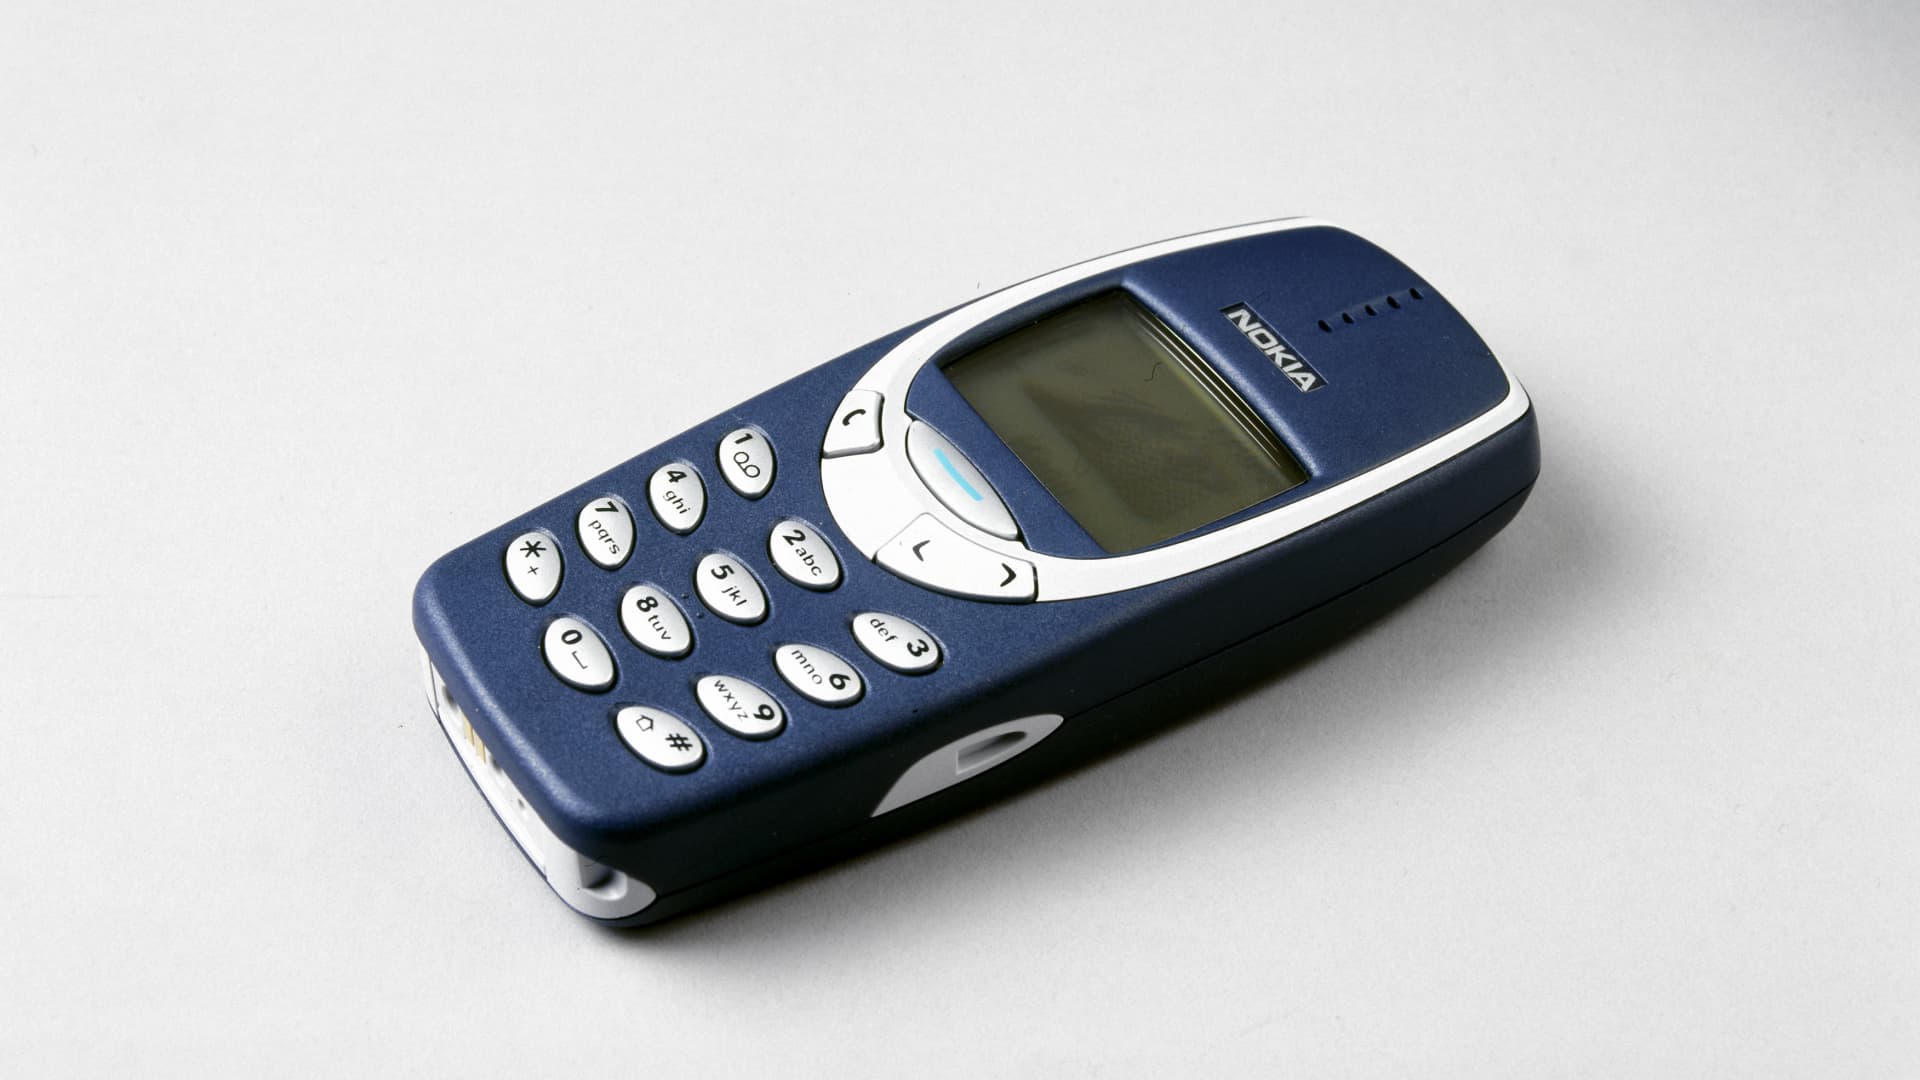 JAPAN - FEBRUARY 15: The Nokia 3310 Launched on the 1st September 2000